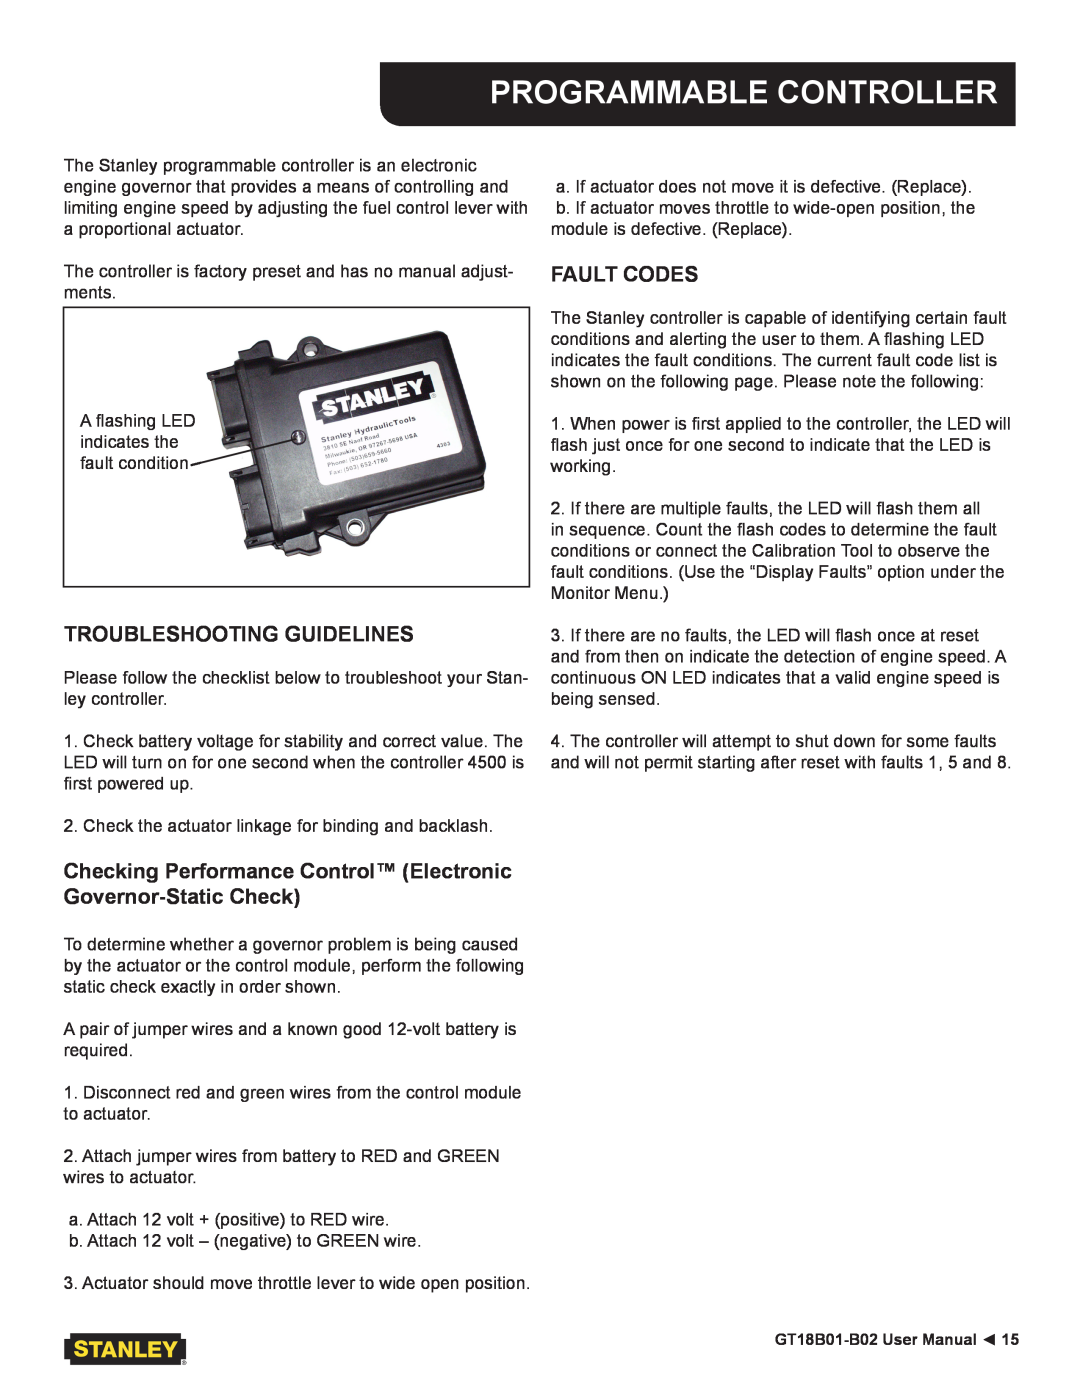 Stanley Black & Decker GT18B01, GT18B02 user manual Programmable Controller, Troubleshooting Guidelines, Fault Codes 